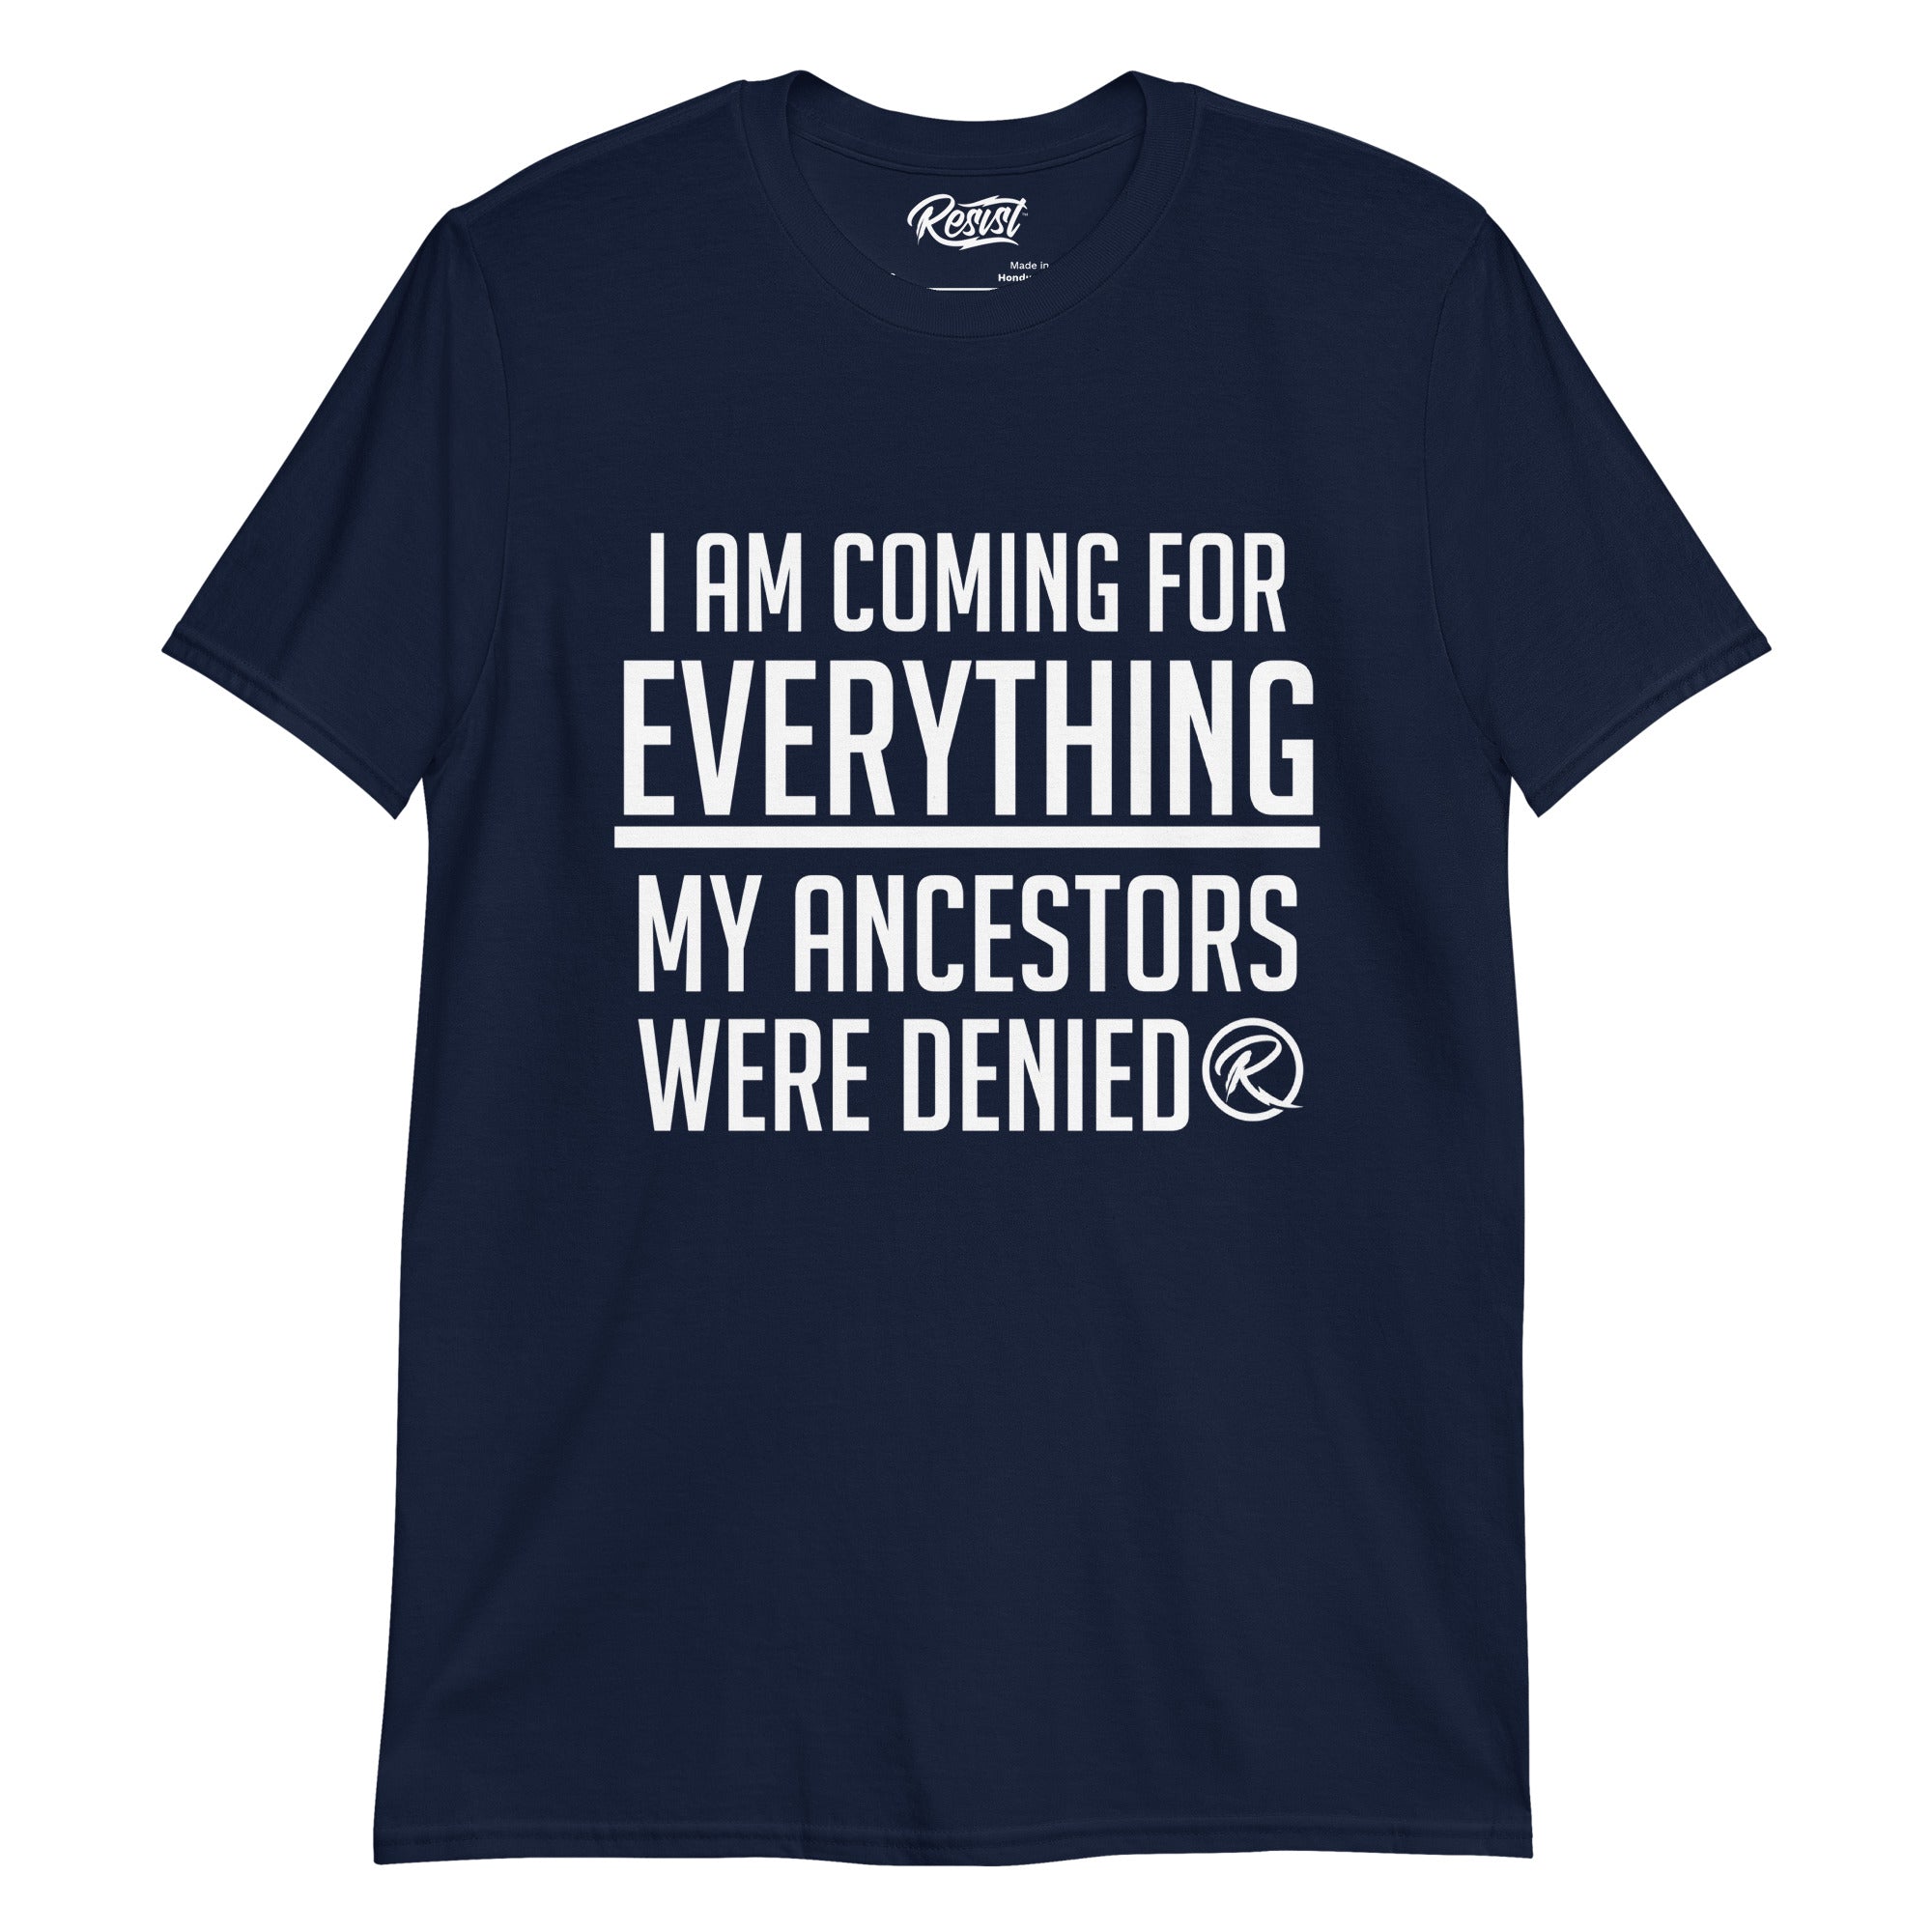 I am coming for EVERYTHING T-shirt